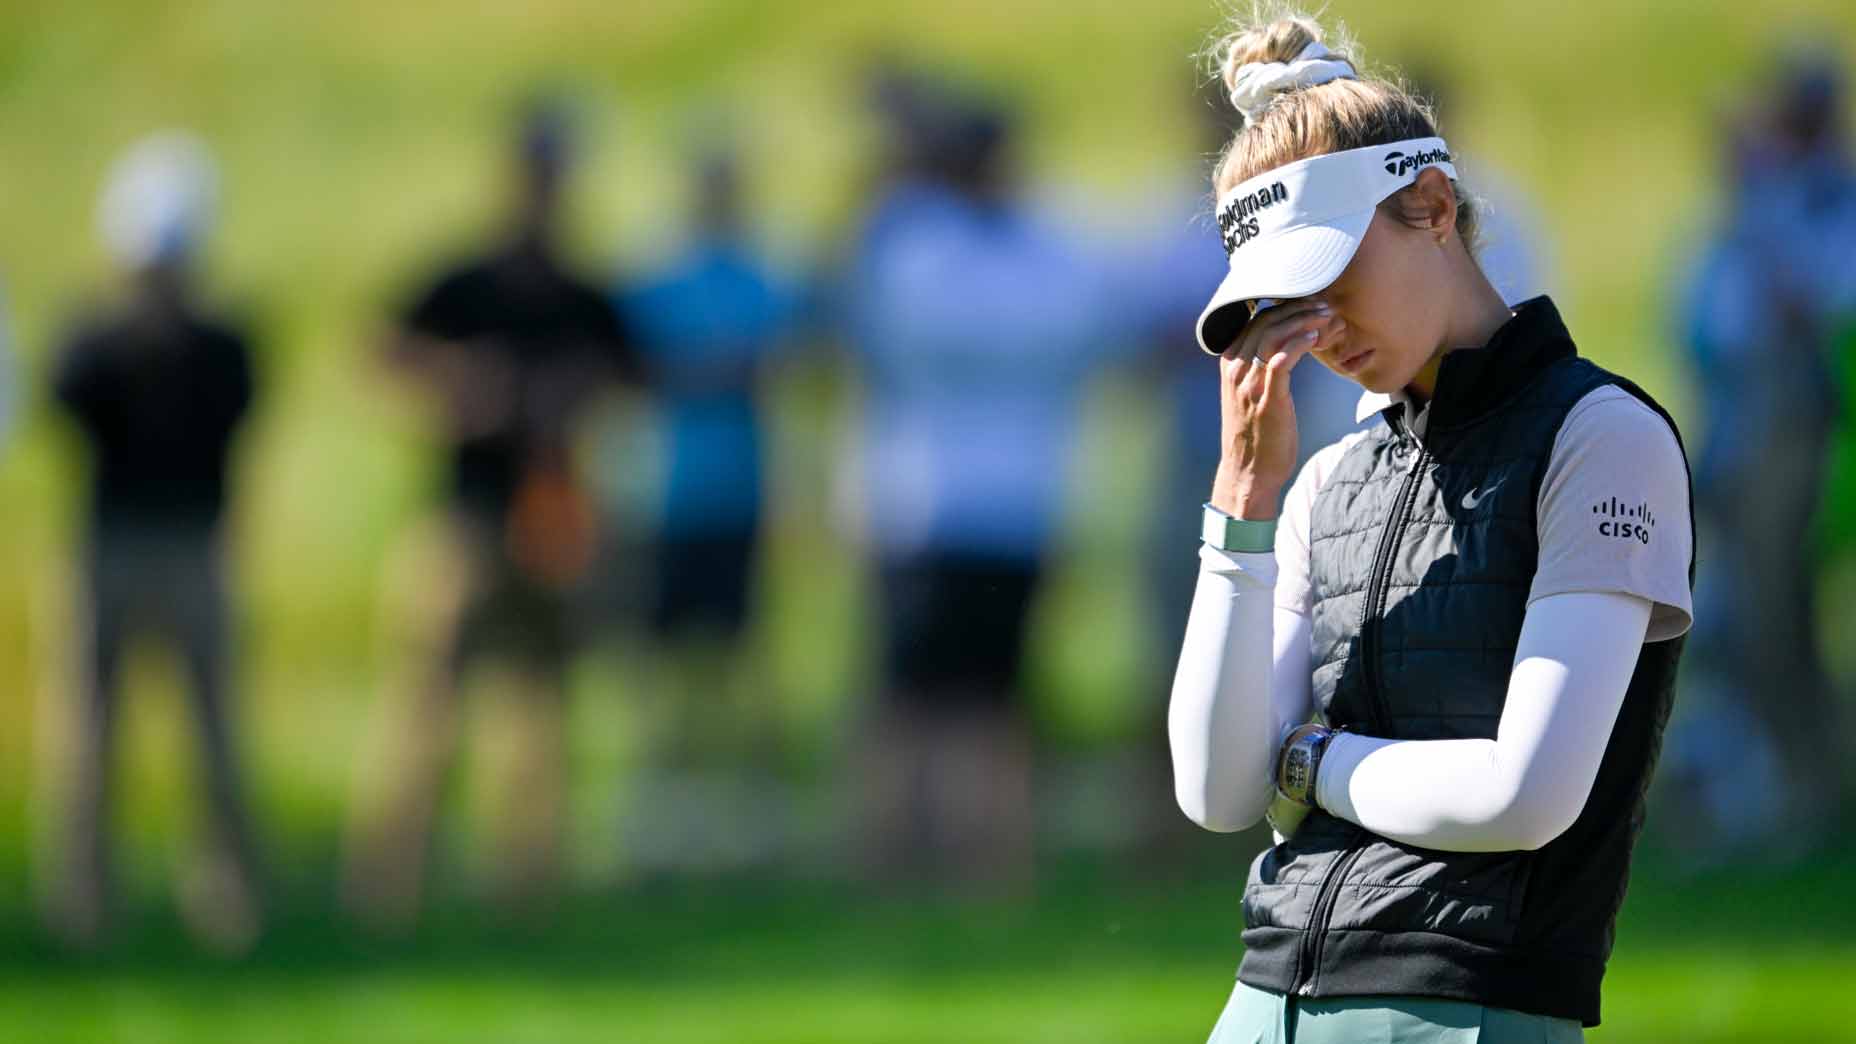 Nelly Korda's disastrous major start reveals striking flaw in her game